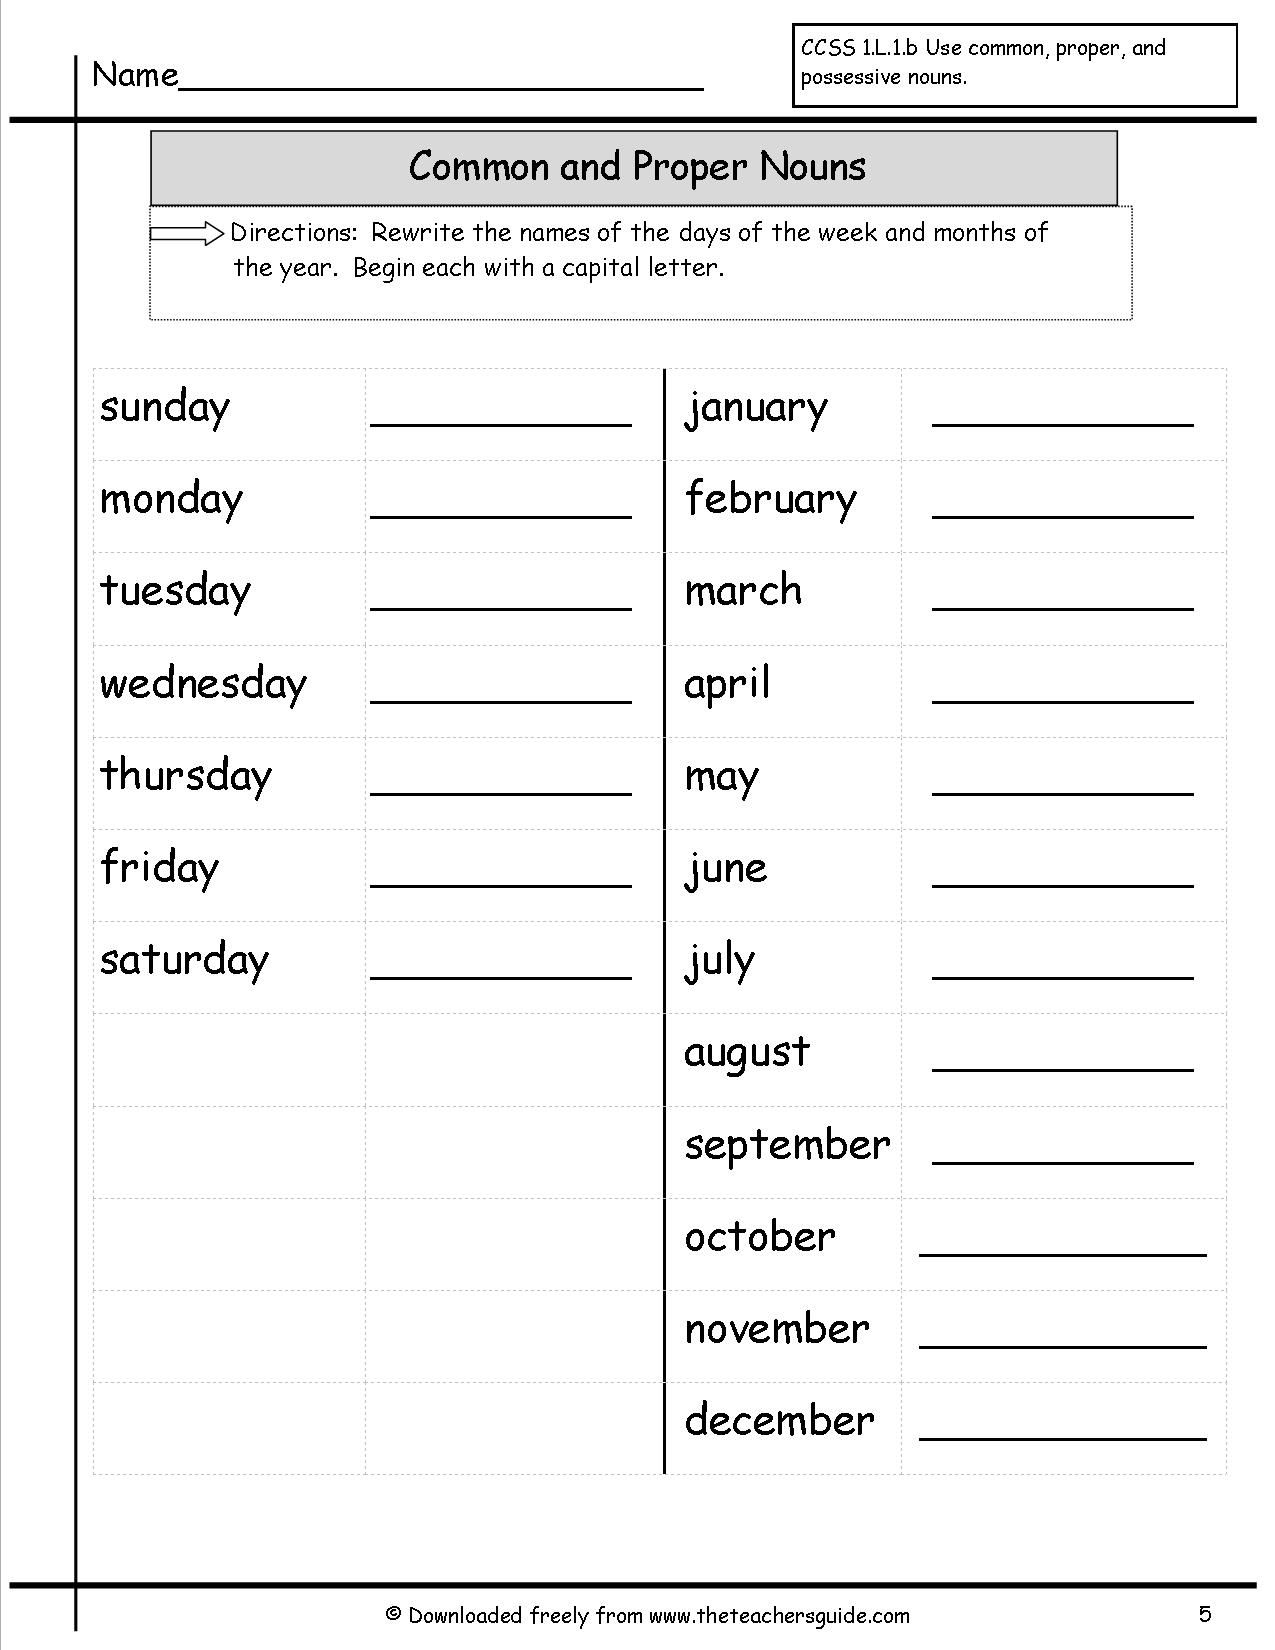 4th Grade Common And Proper Nouns Worksheets For Grade 4 With Answers Askworksheet